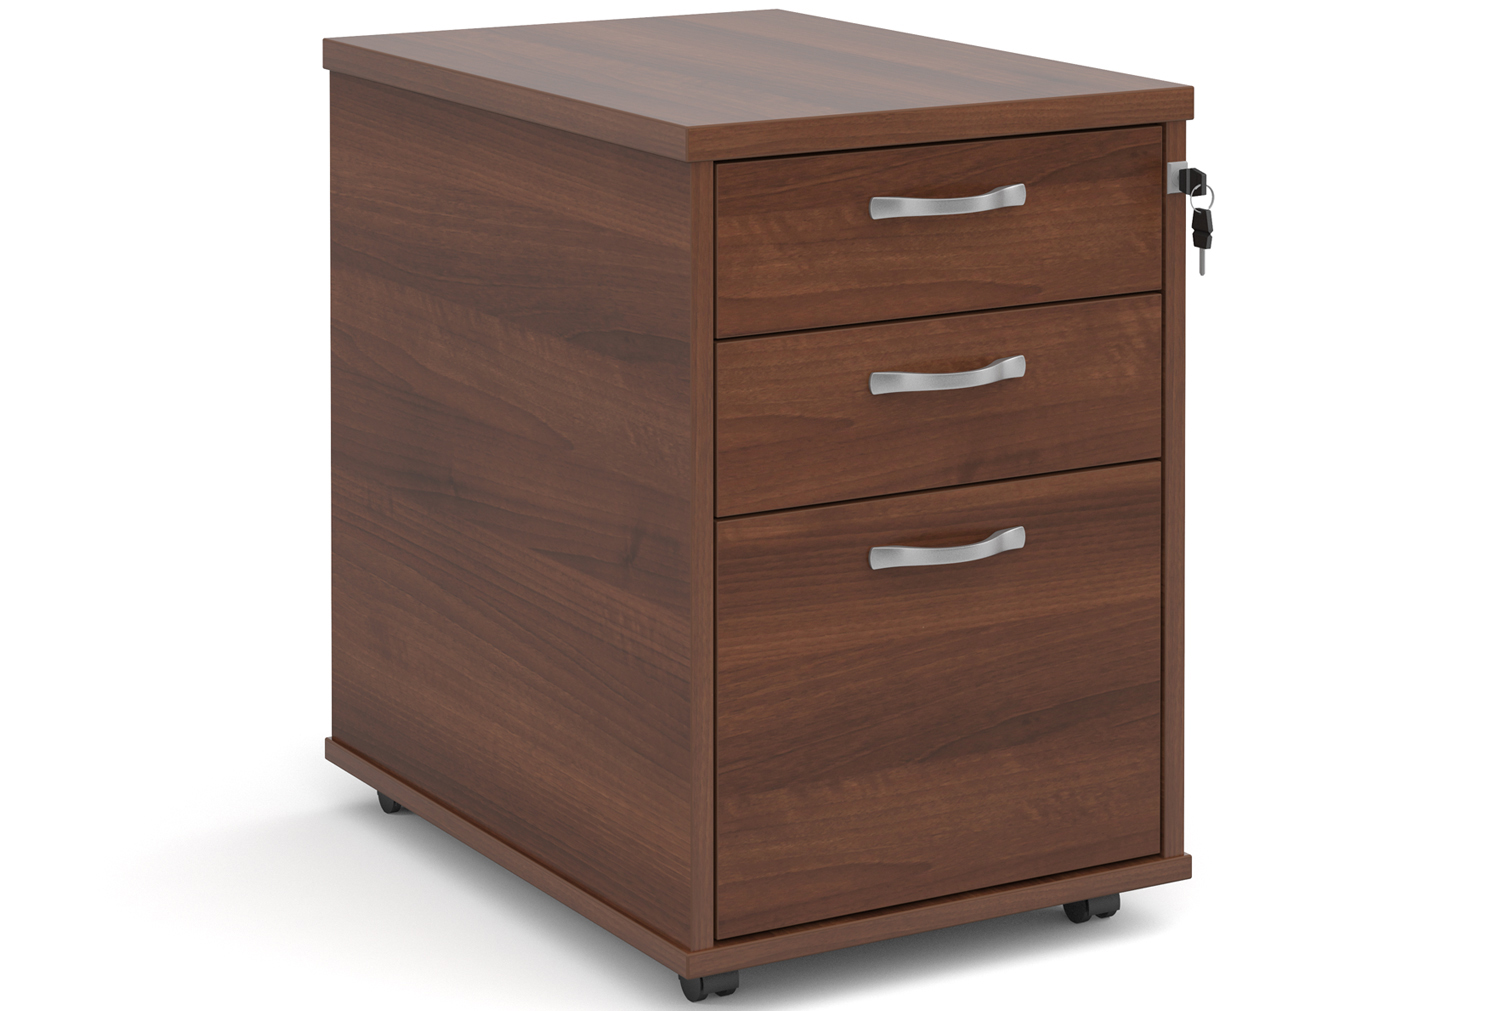 Thrifty Next-Day Under Desk Tall Mobile Pedestal Walnut, Express Delivery